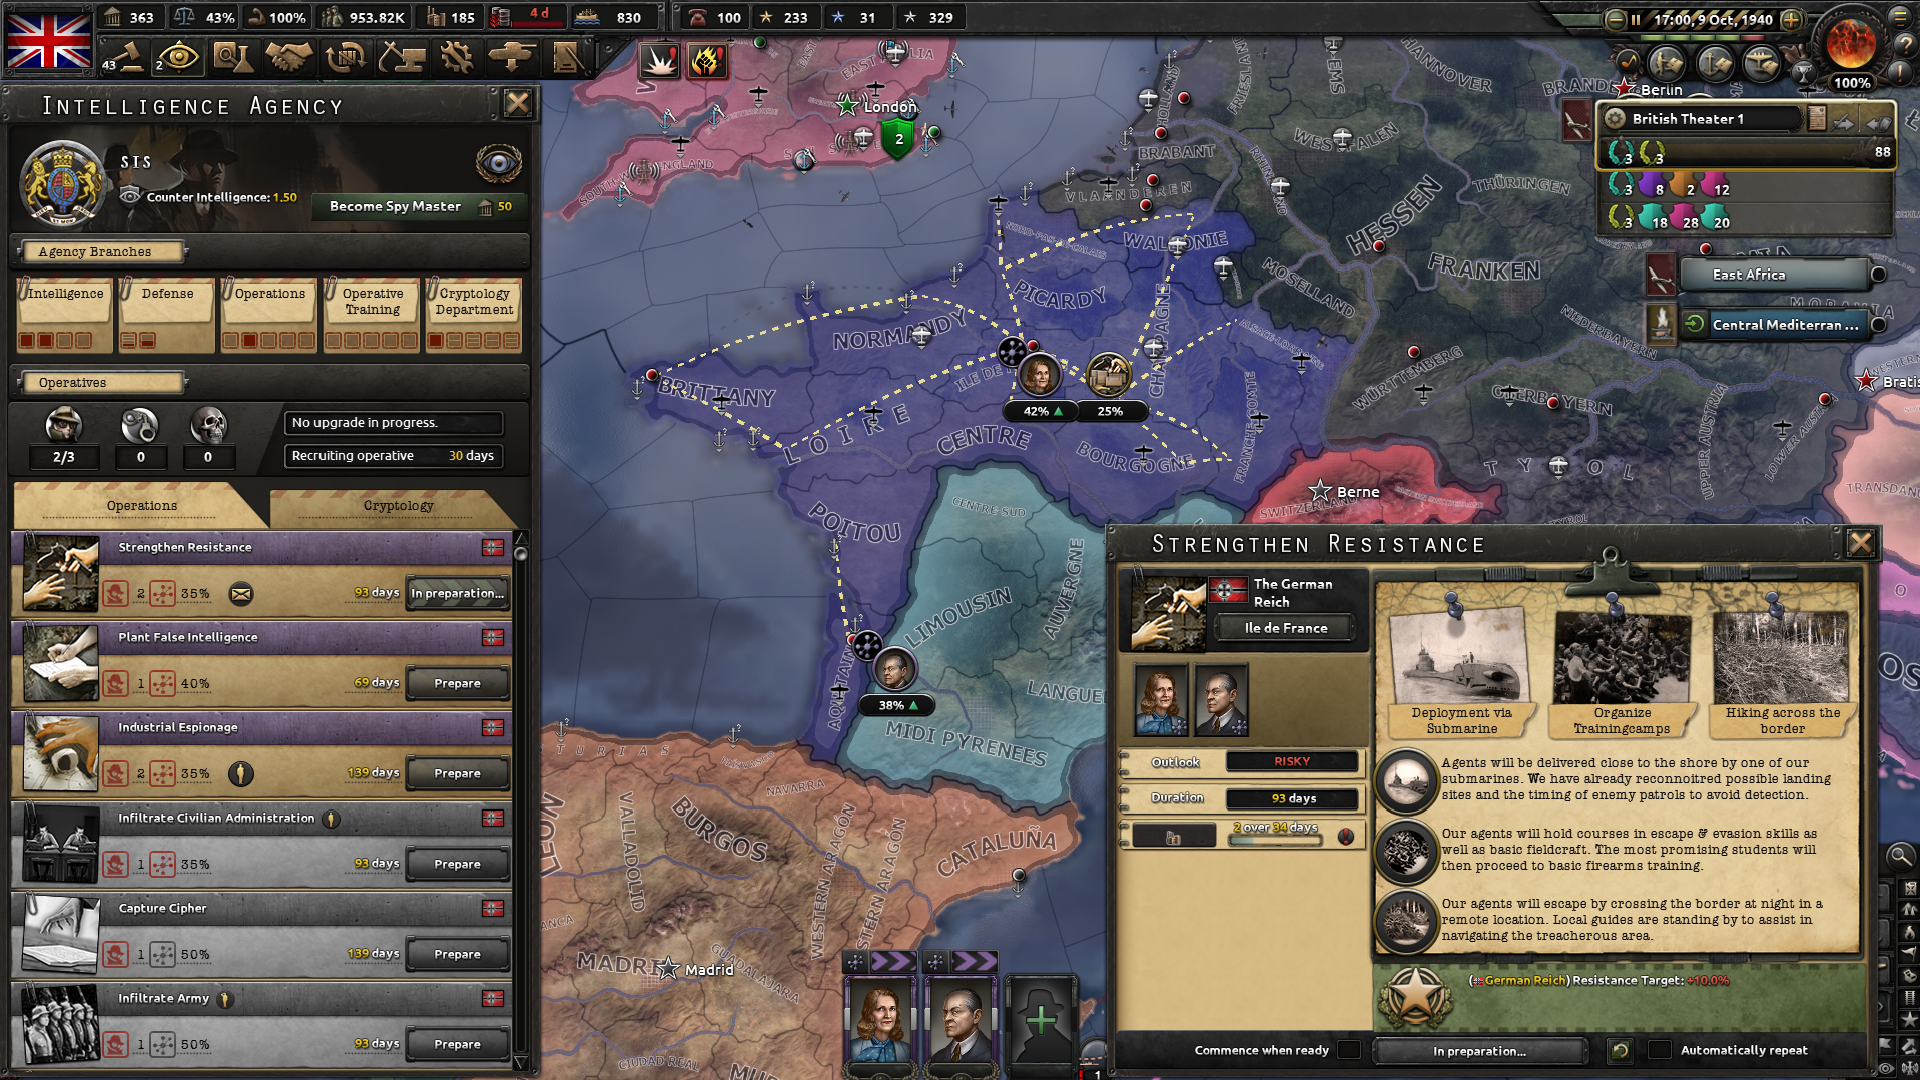 Considering options at the Intelligence Agency in a Hearts Of Iron IV screenshot.